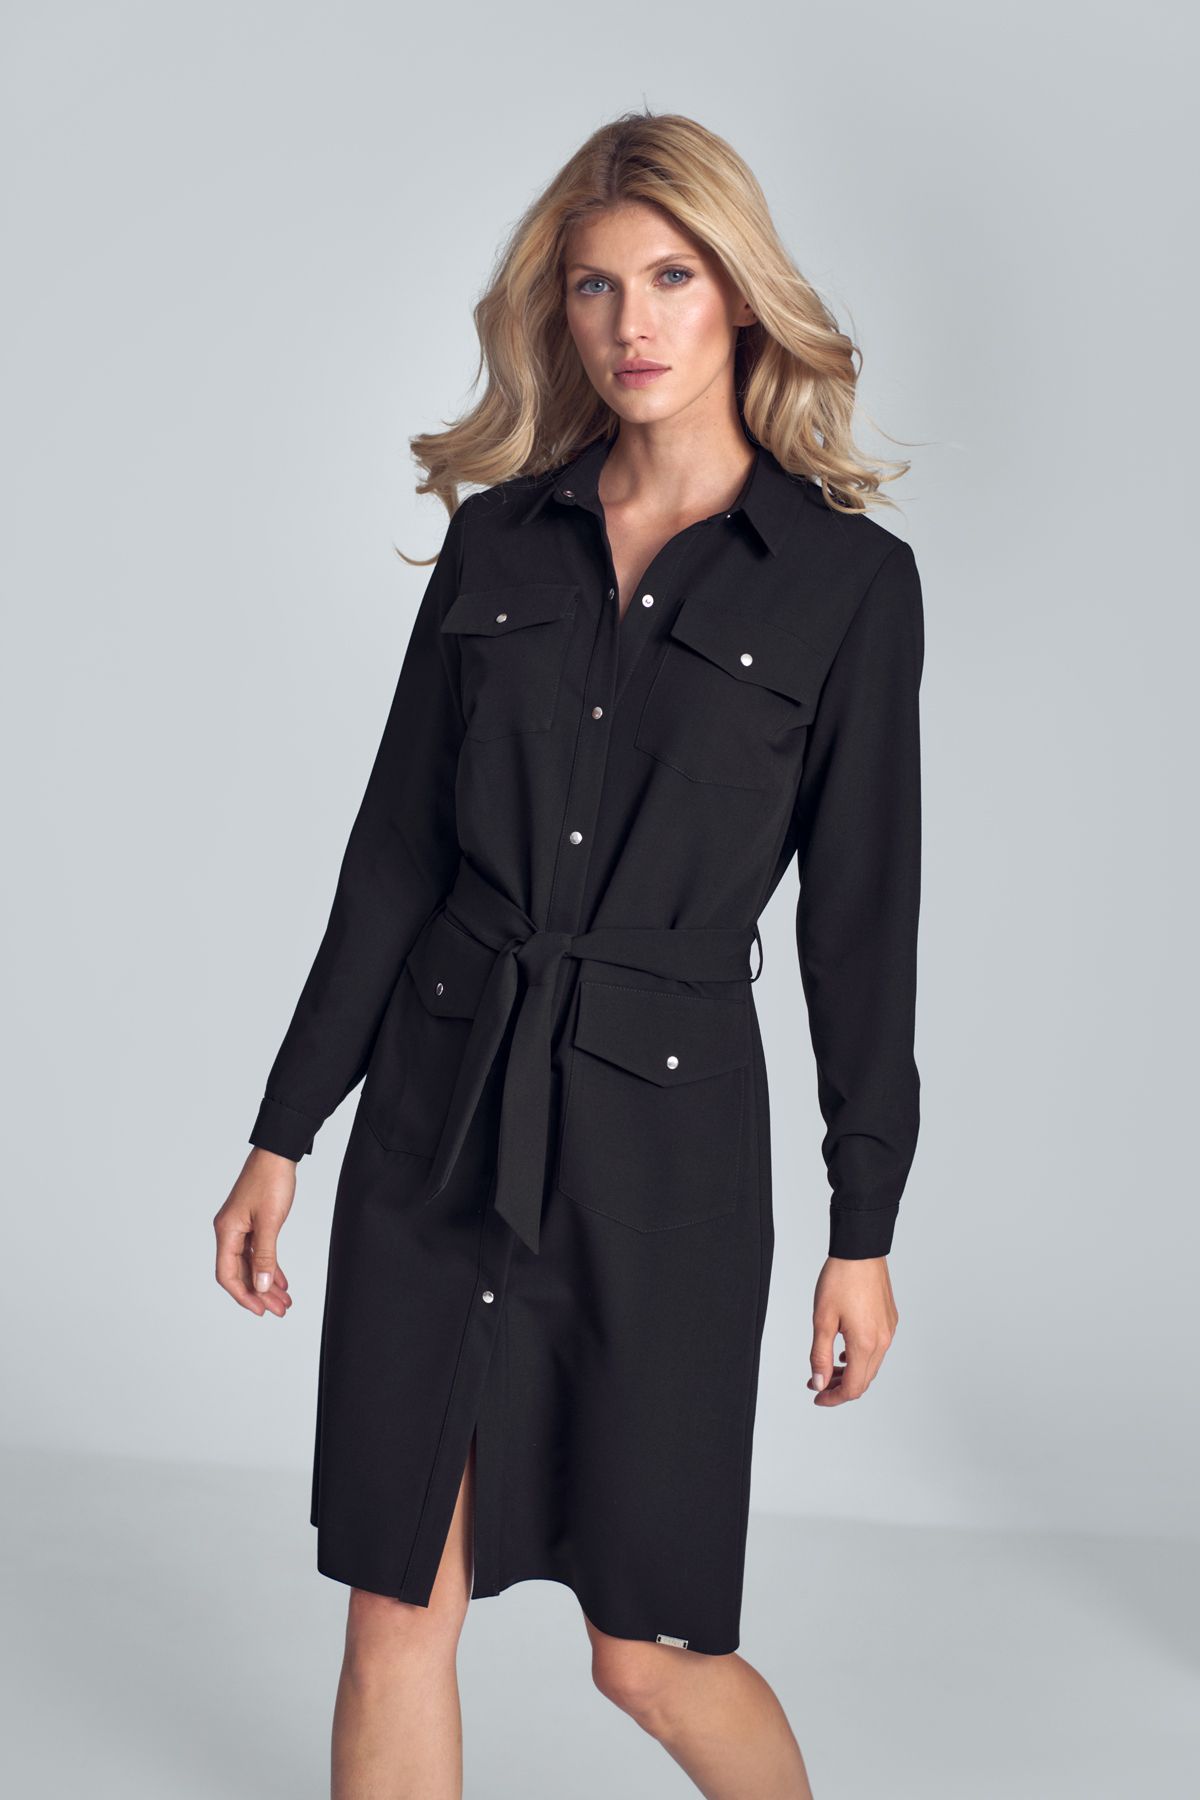 Black shirt midi dress with long sleeve, tied at the waist with a fabric belt, fastened with snaps, four  pockets on the front.